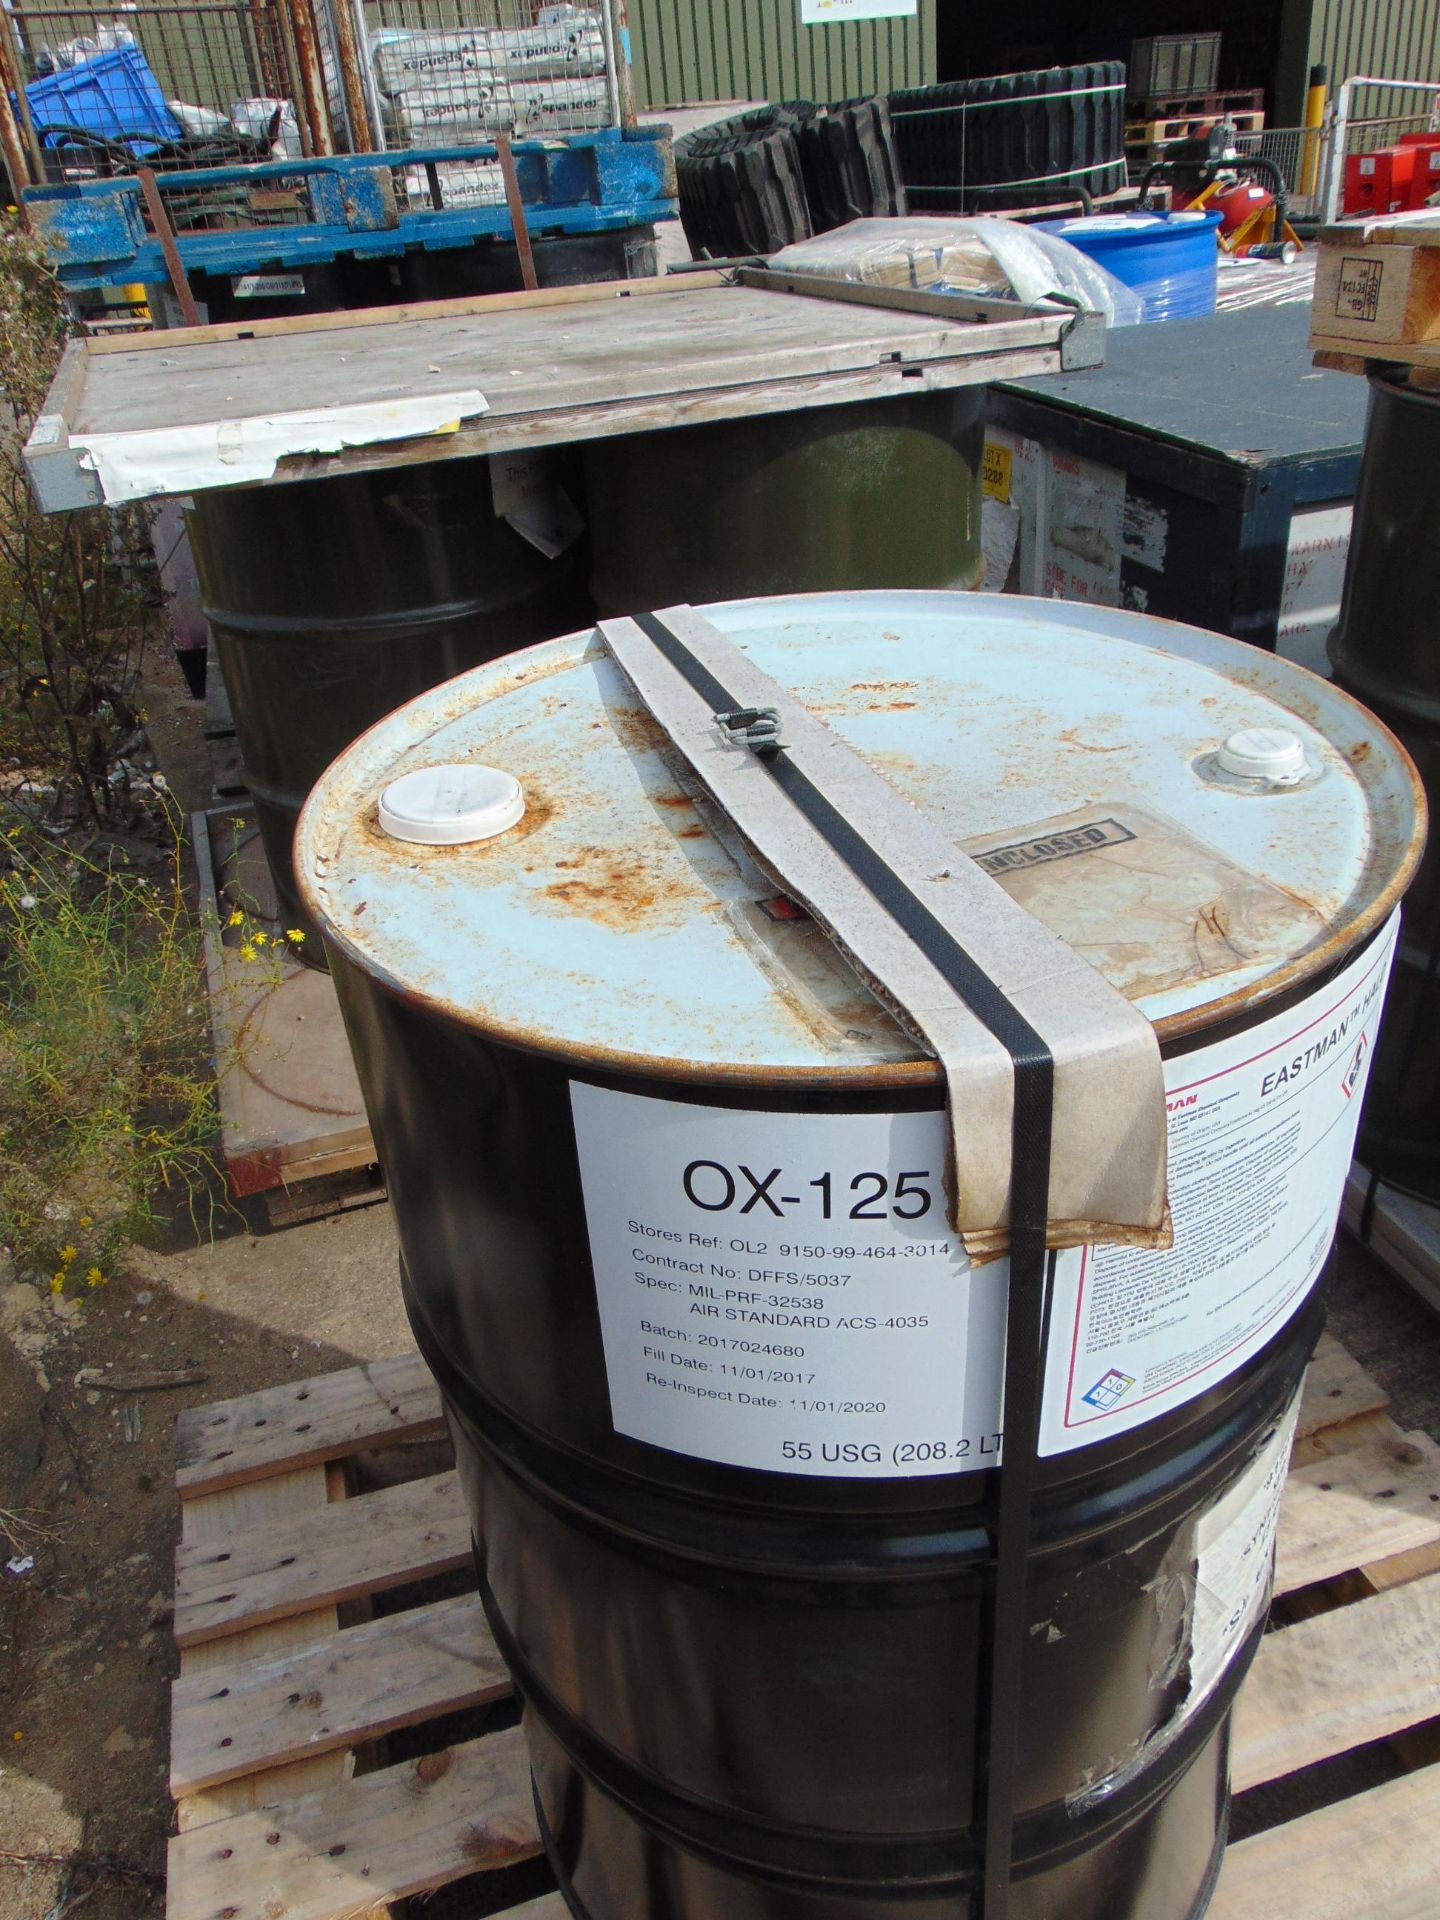 1X 205L BARREL OF OX-125 EASTMAN HALO 157 HIGH QUALITY ESTER BASED AVIATION TURBINE/HELICOPTER OIL - Image 2 of 4